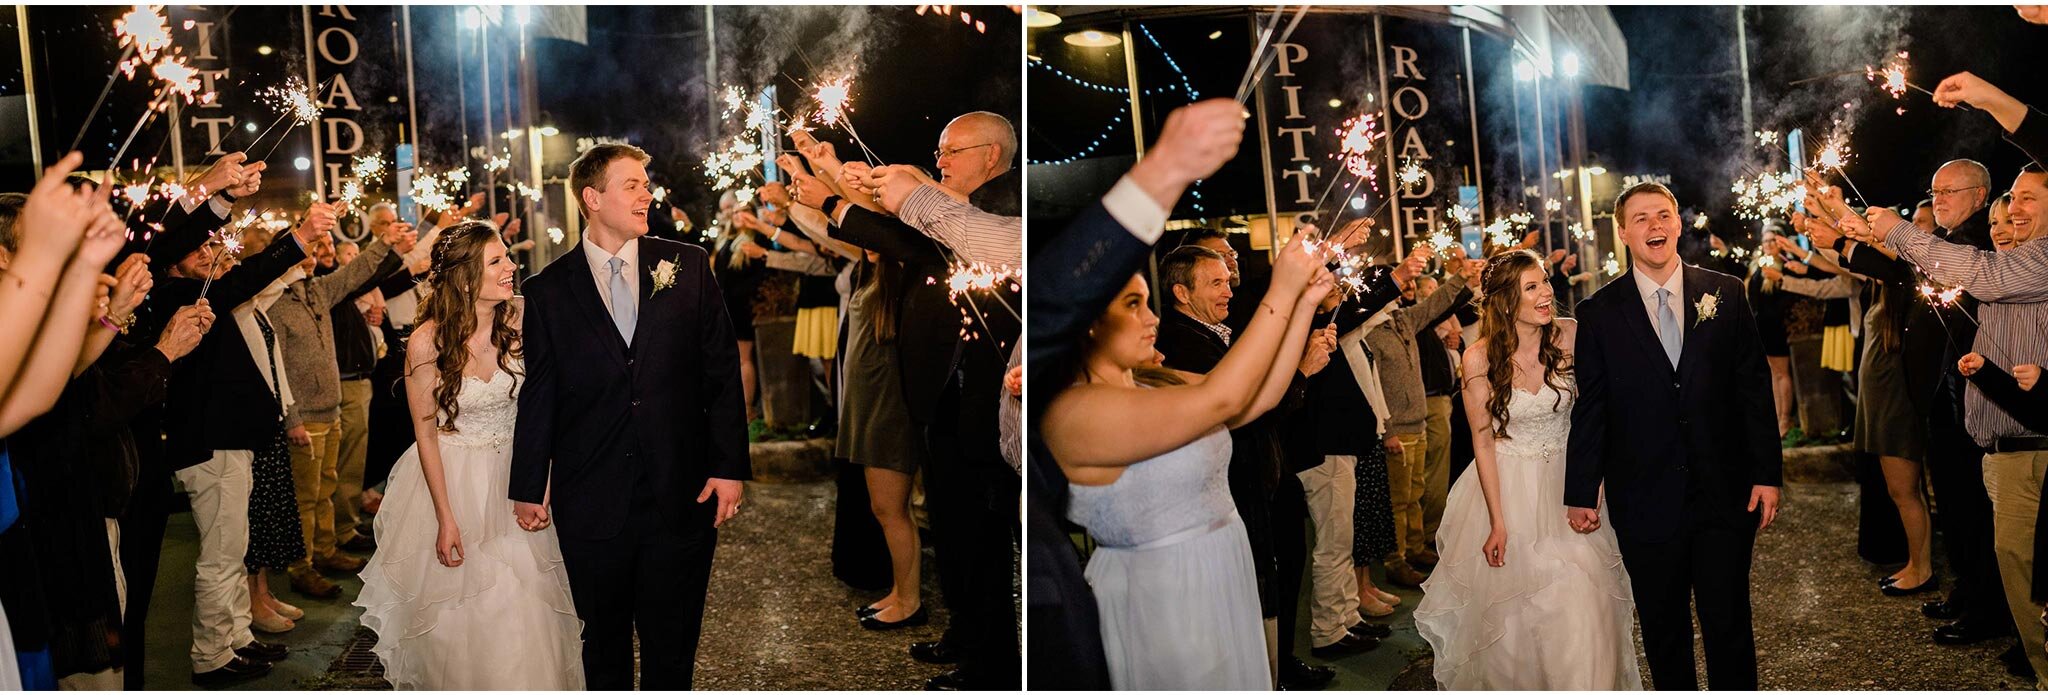 Durham Wedding Photographer | By G. Lin Photography | Bride and groom laughing during sparkler sendoff